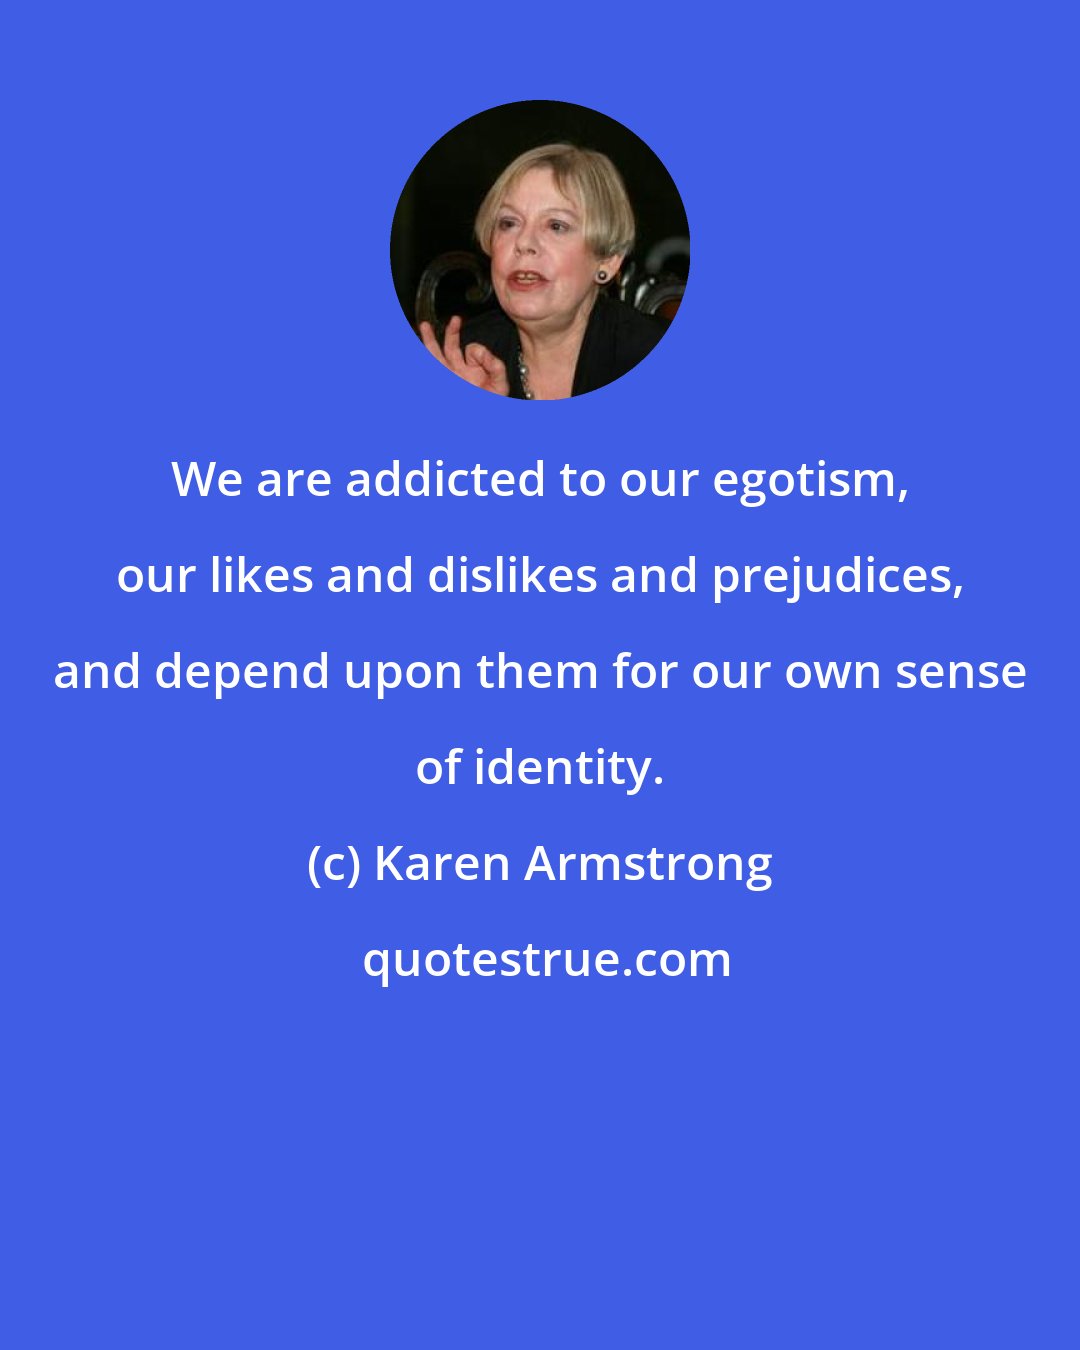 Karen Armstrong: We are addicted to our egotism, our likes and dislikes and prejudices, and depend upon them for our own sense of identity.